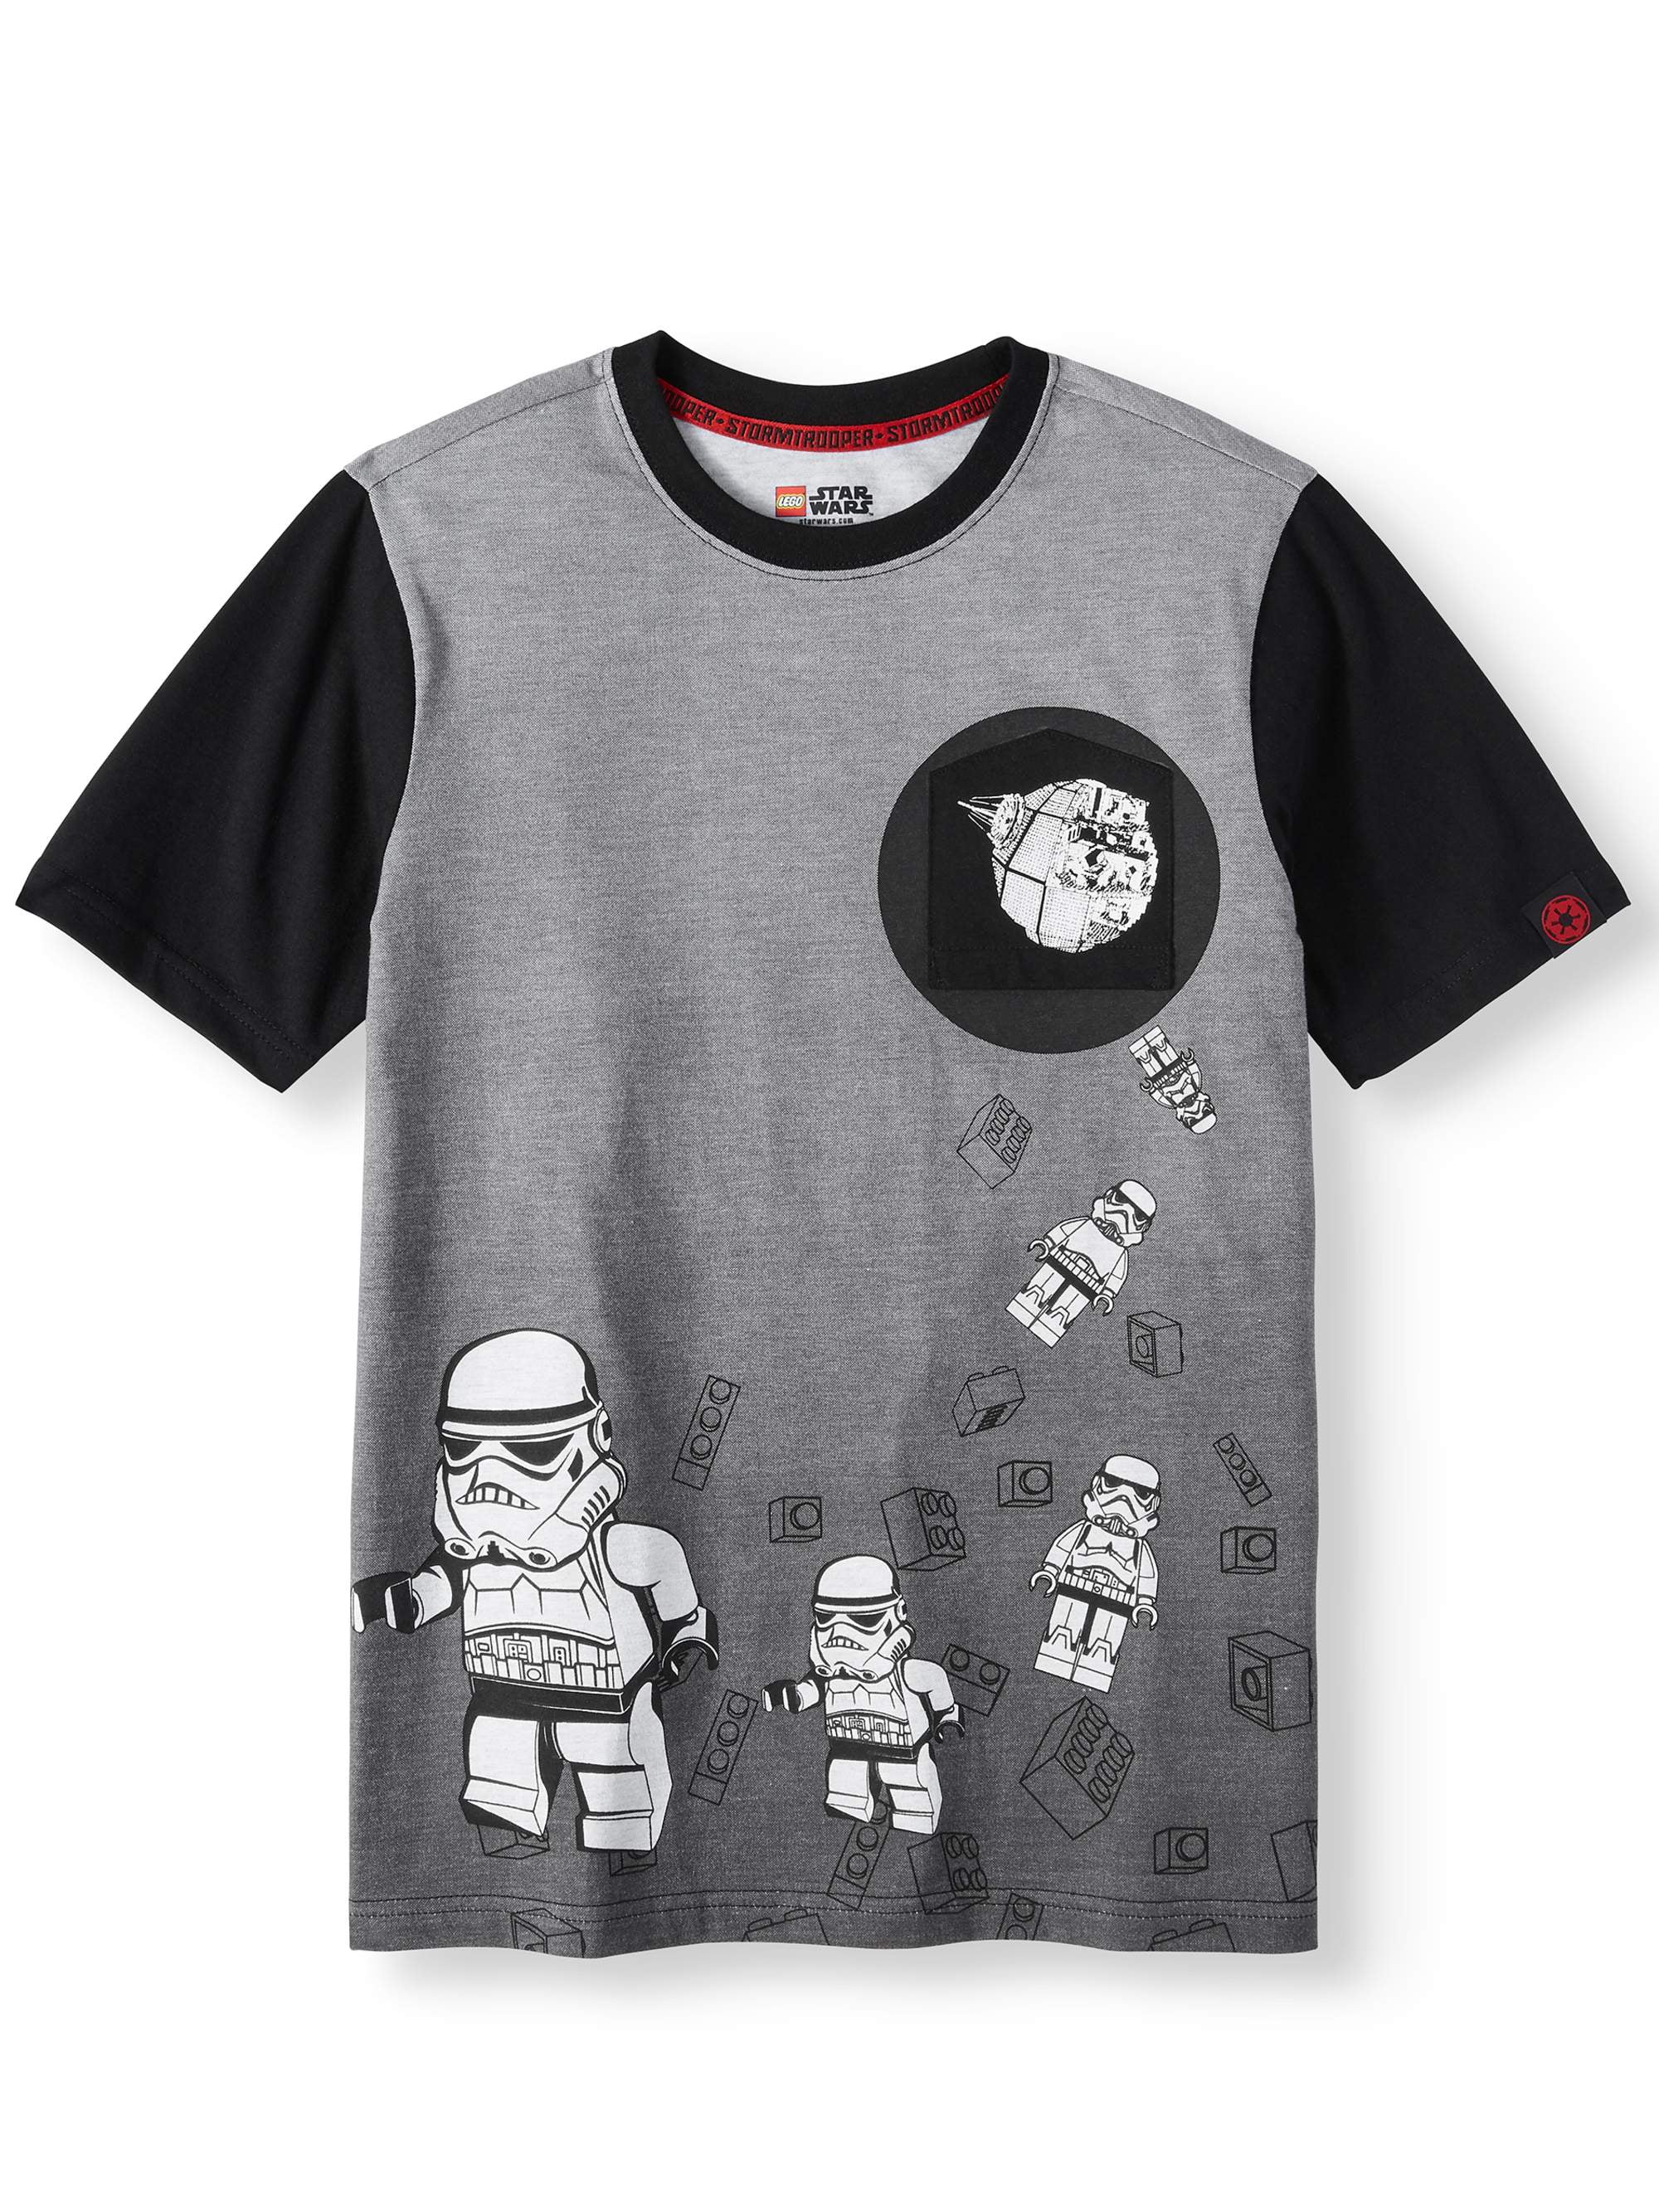 Boys Fashion Top Kids Birthday Gift Idea Star Wars Stormtrooper Bright Camo Helmet Boys T-Shirt Childrens Clothes Star Wars Gifts Ages 4-15 Official Merchandise